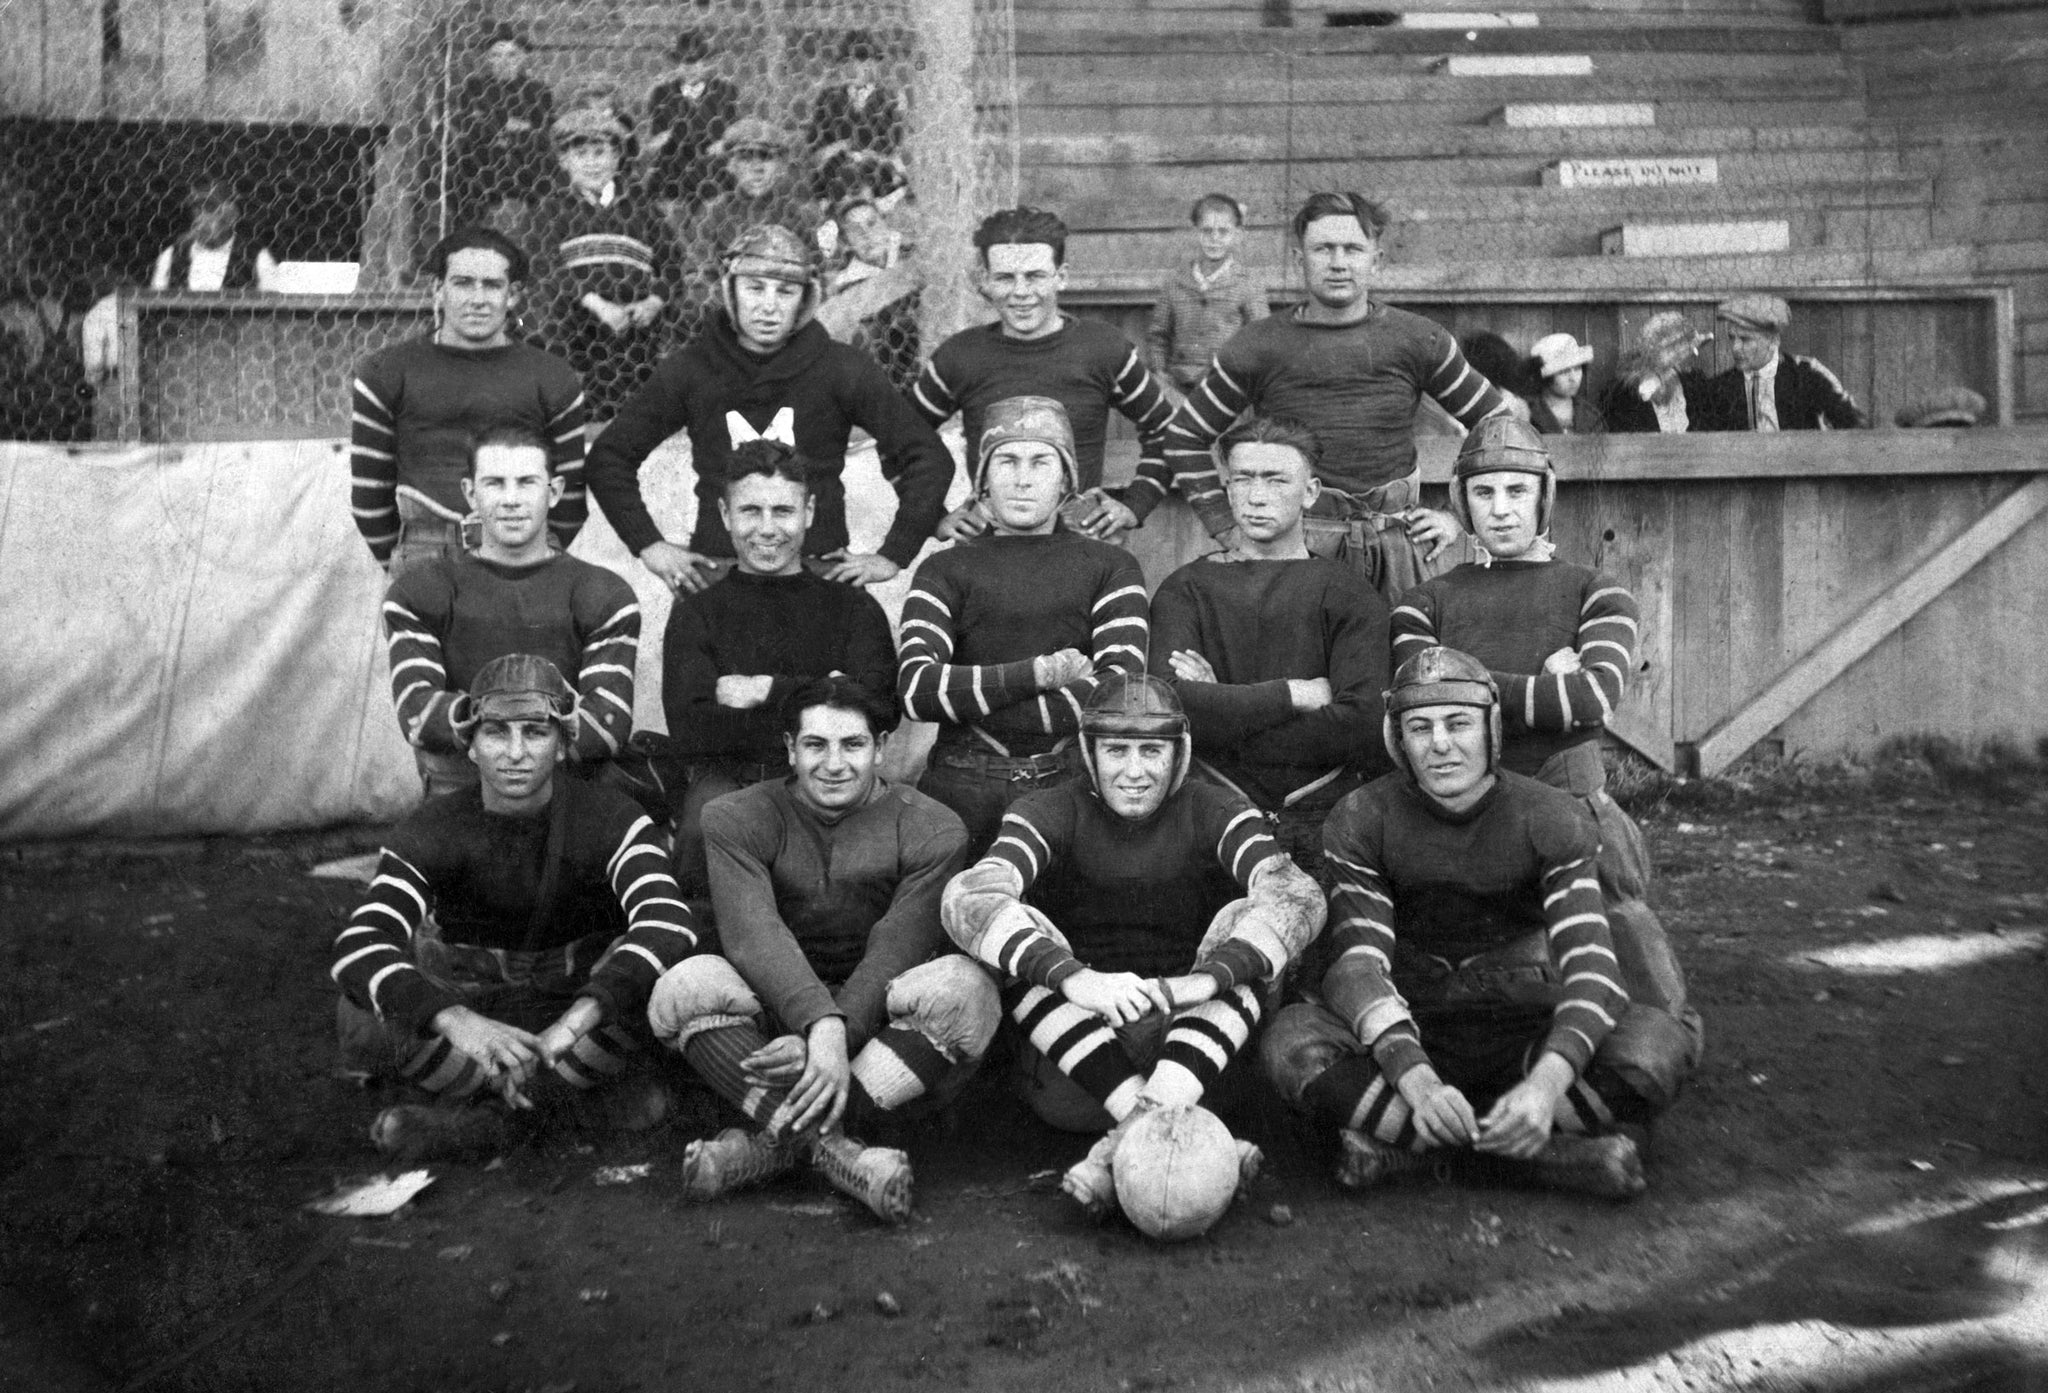 The Junior Moose football squad, 1920. Front row, from left: Antoine Johnson, Albert Strazzo, George Boyle, Richard Terret. Middle row: Dick Boyle, Big Fountain, Vince Walsh, Allie Kenworthy, Leo Little. Back row: Mike Malstead, Norman Seeney, Bert Killerb, Frank Peters. -- Courtesy of the Vallejo Naval and Historical Museum